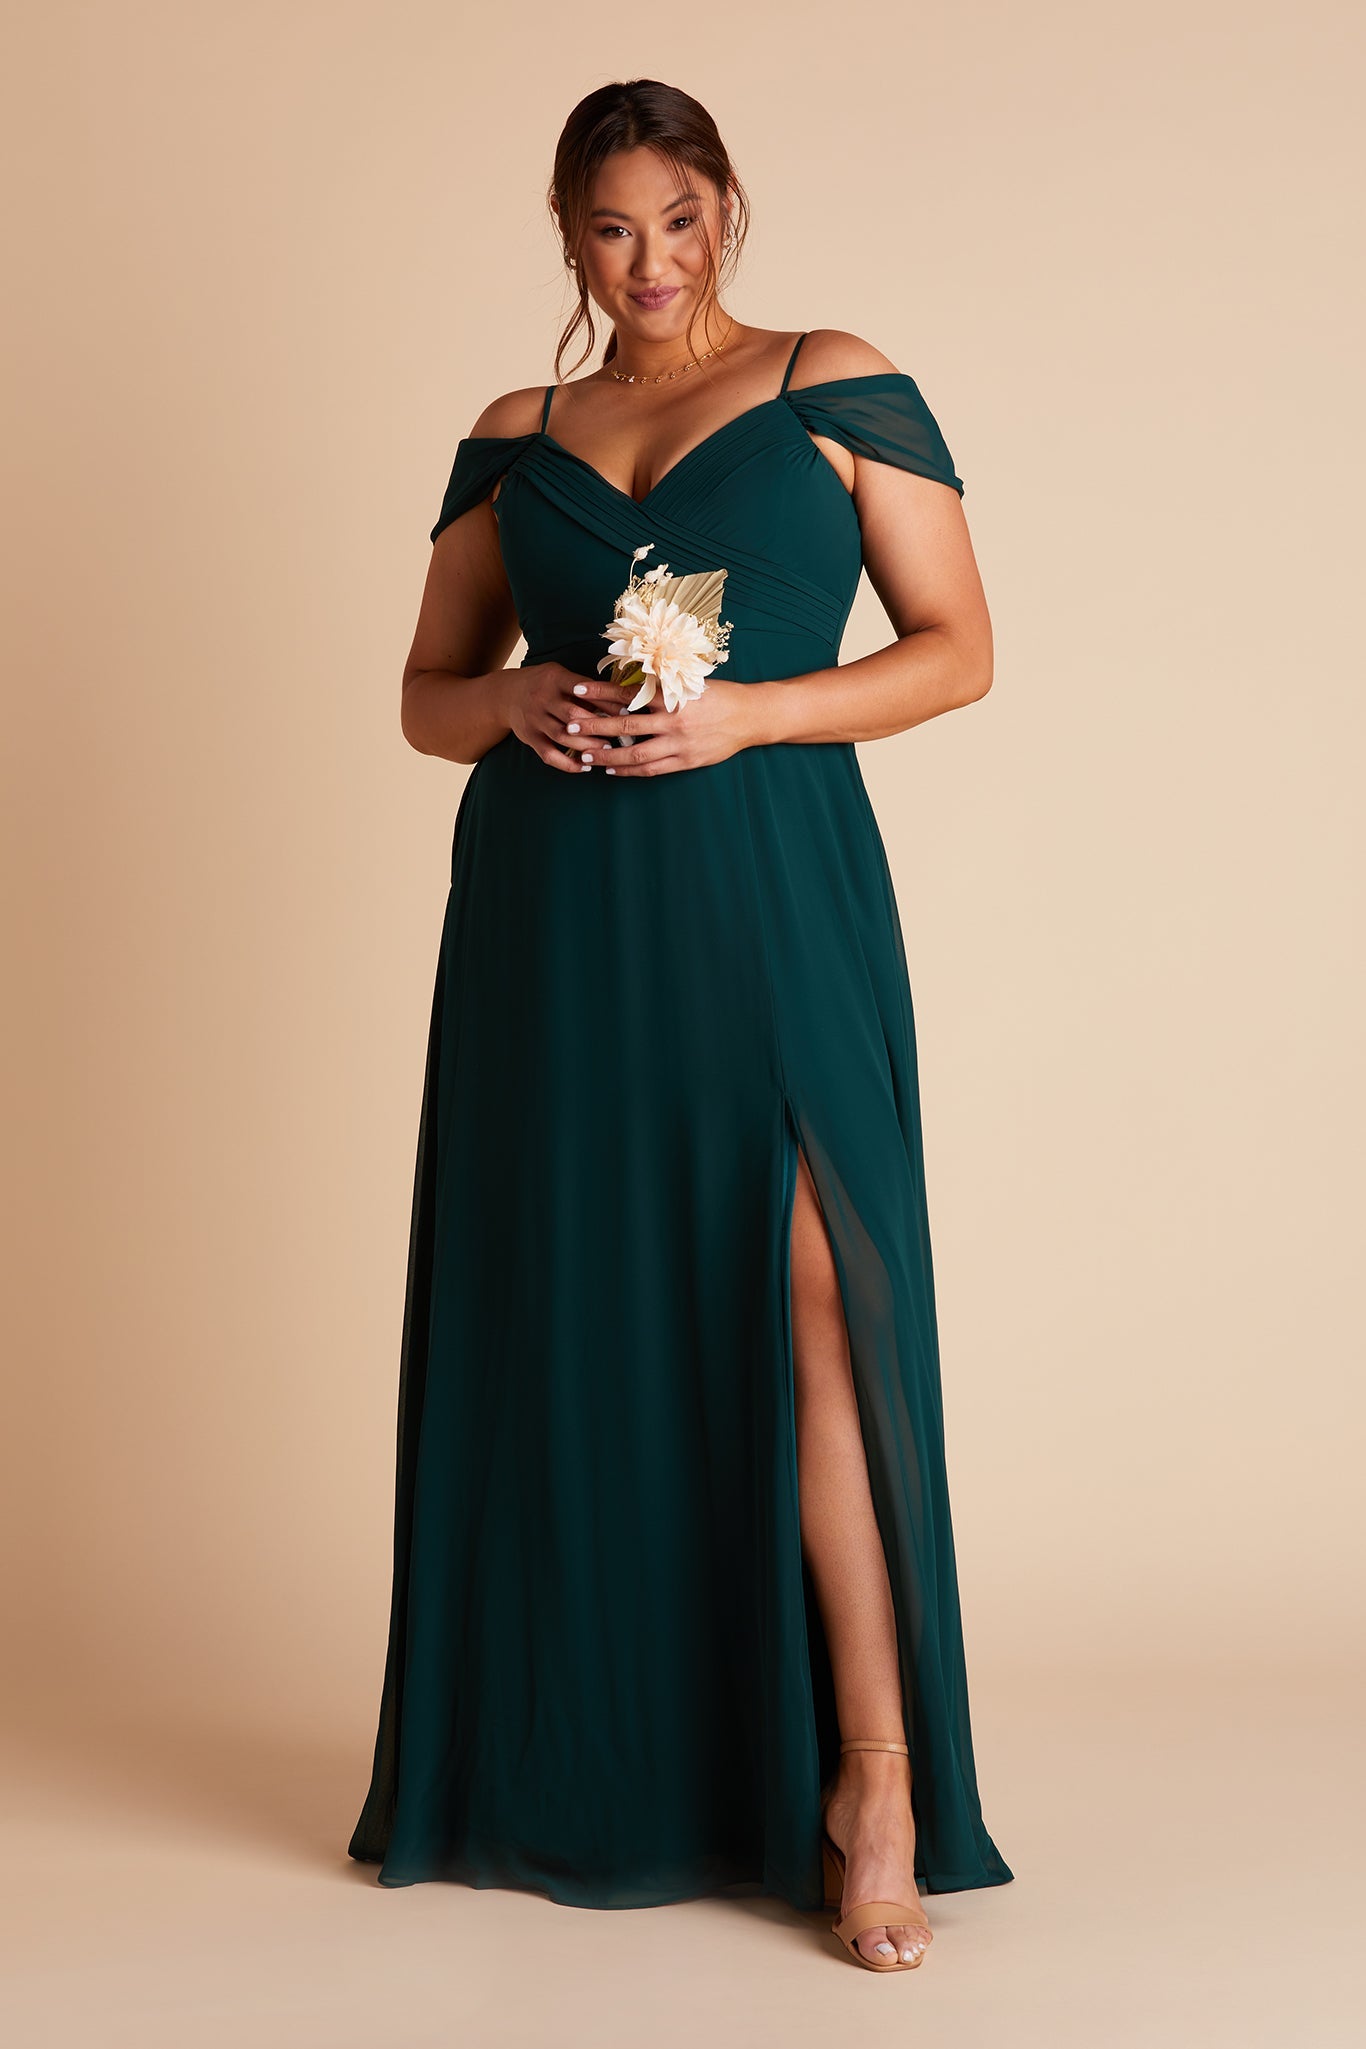 Plus Size Bridesmaid Dresses From $99